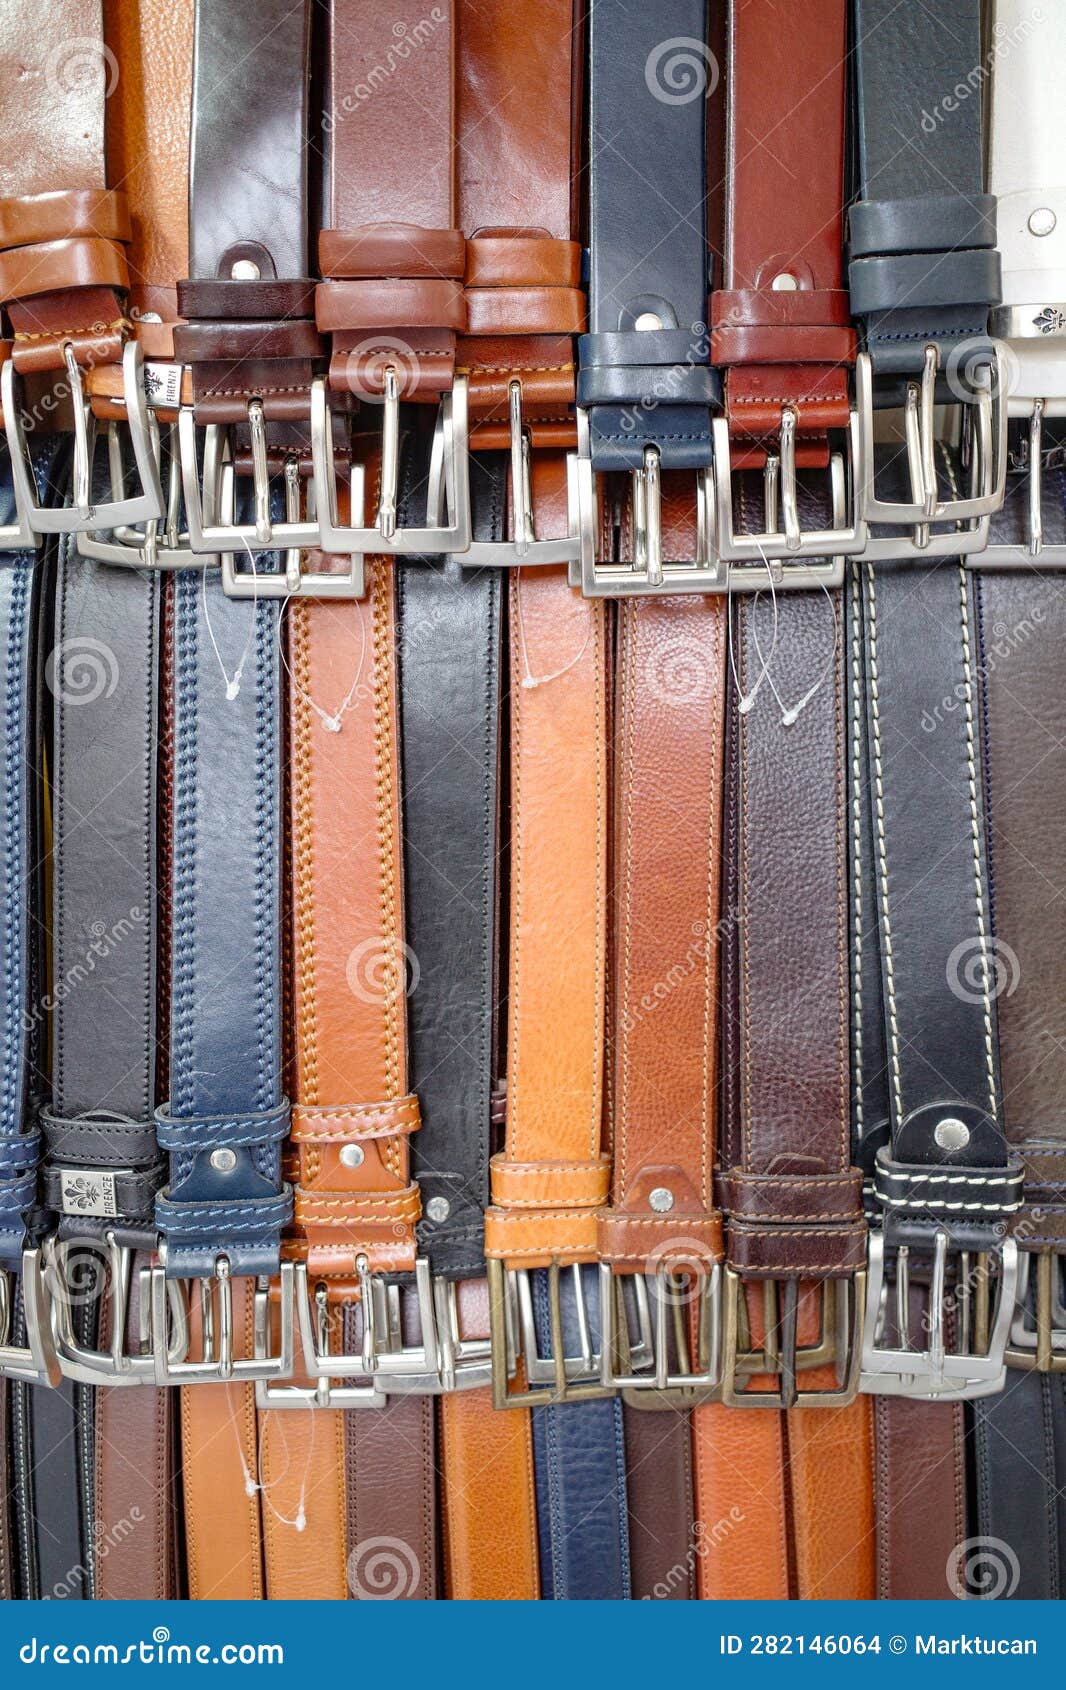 florence, italy - 22 nov, 2022: belts and leathers goods for sale near florence central market